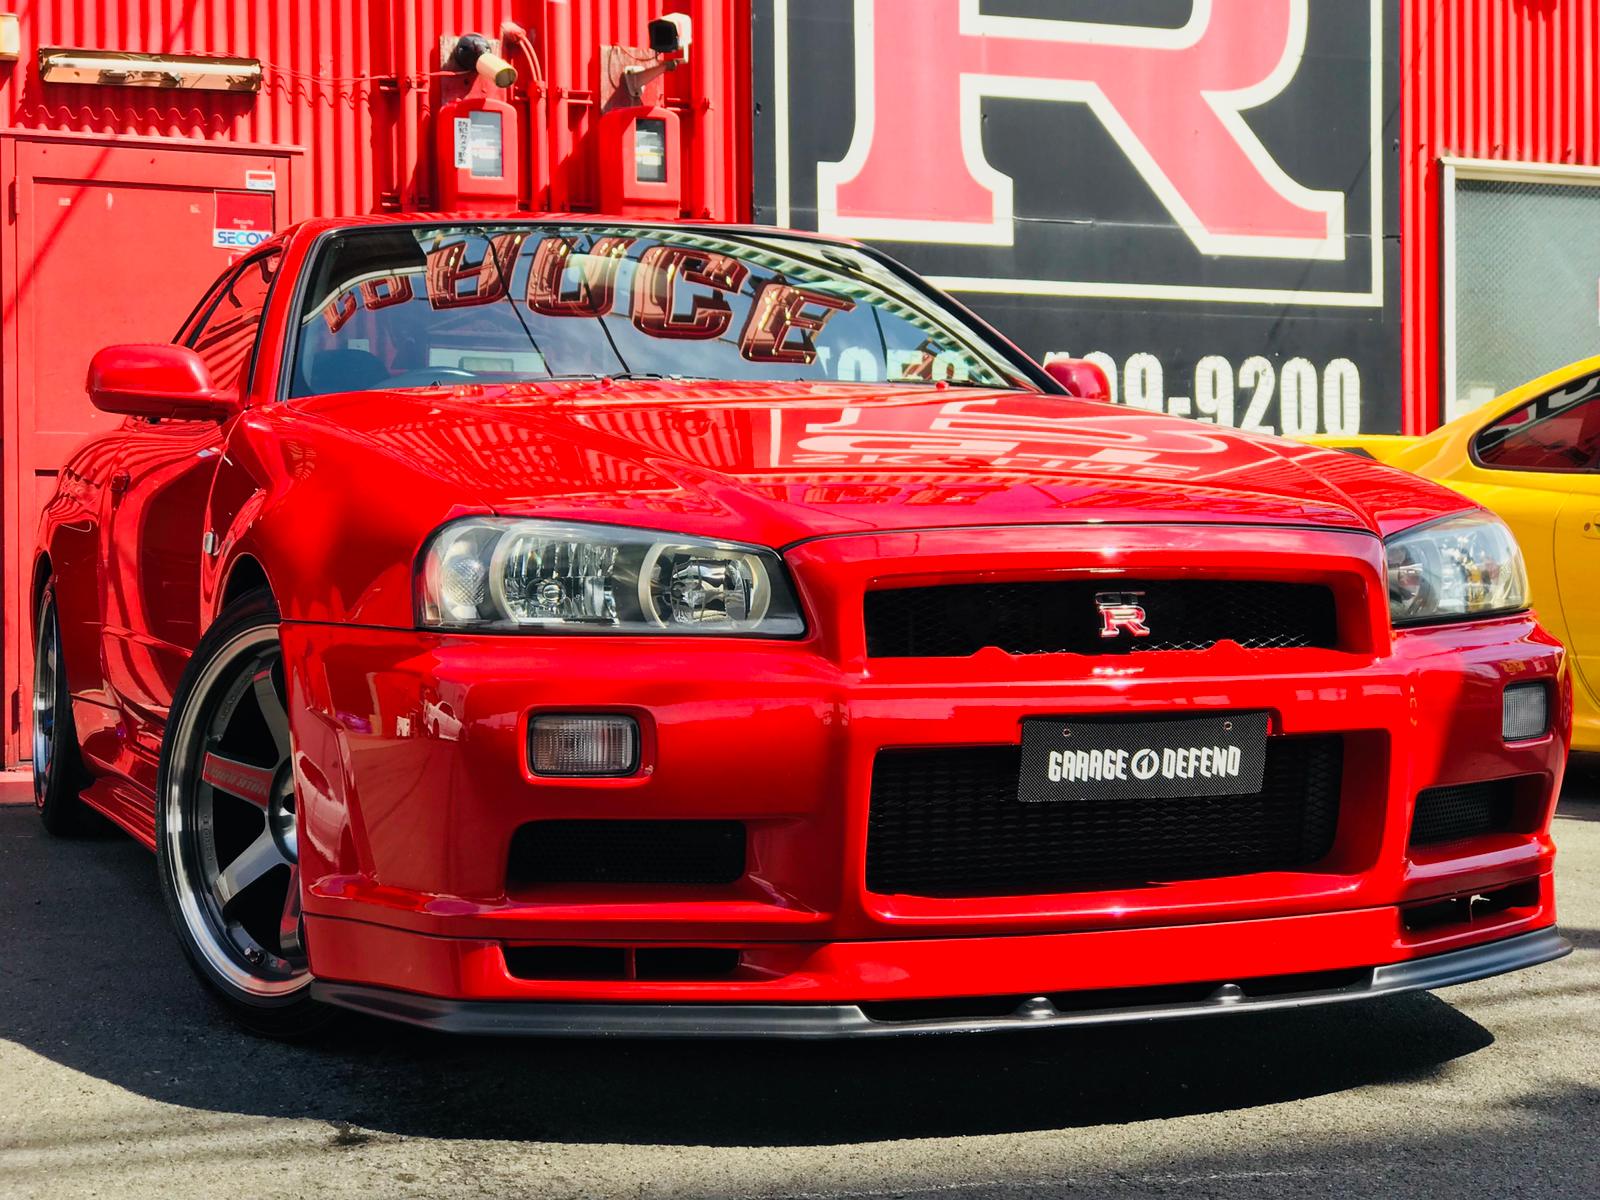 Lady In Red R34 Gtr For Sale Garage Defend